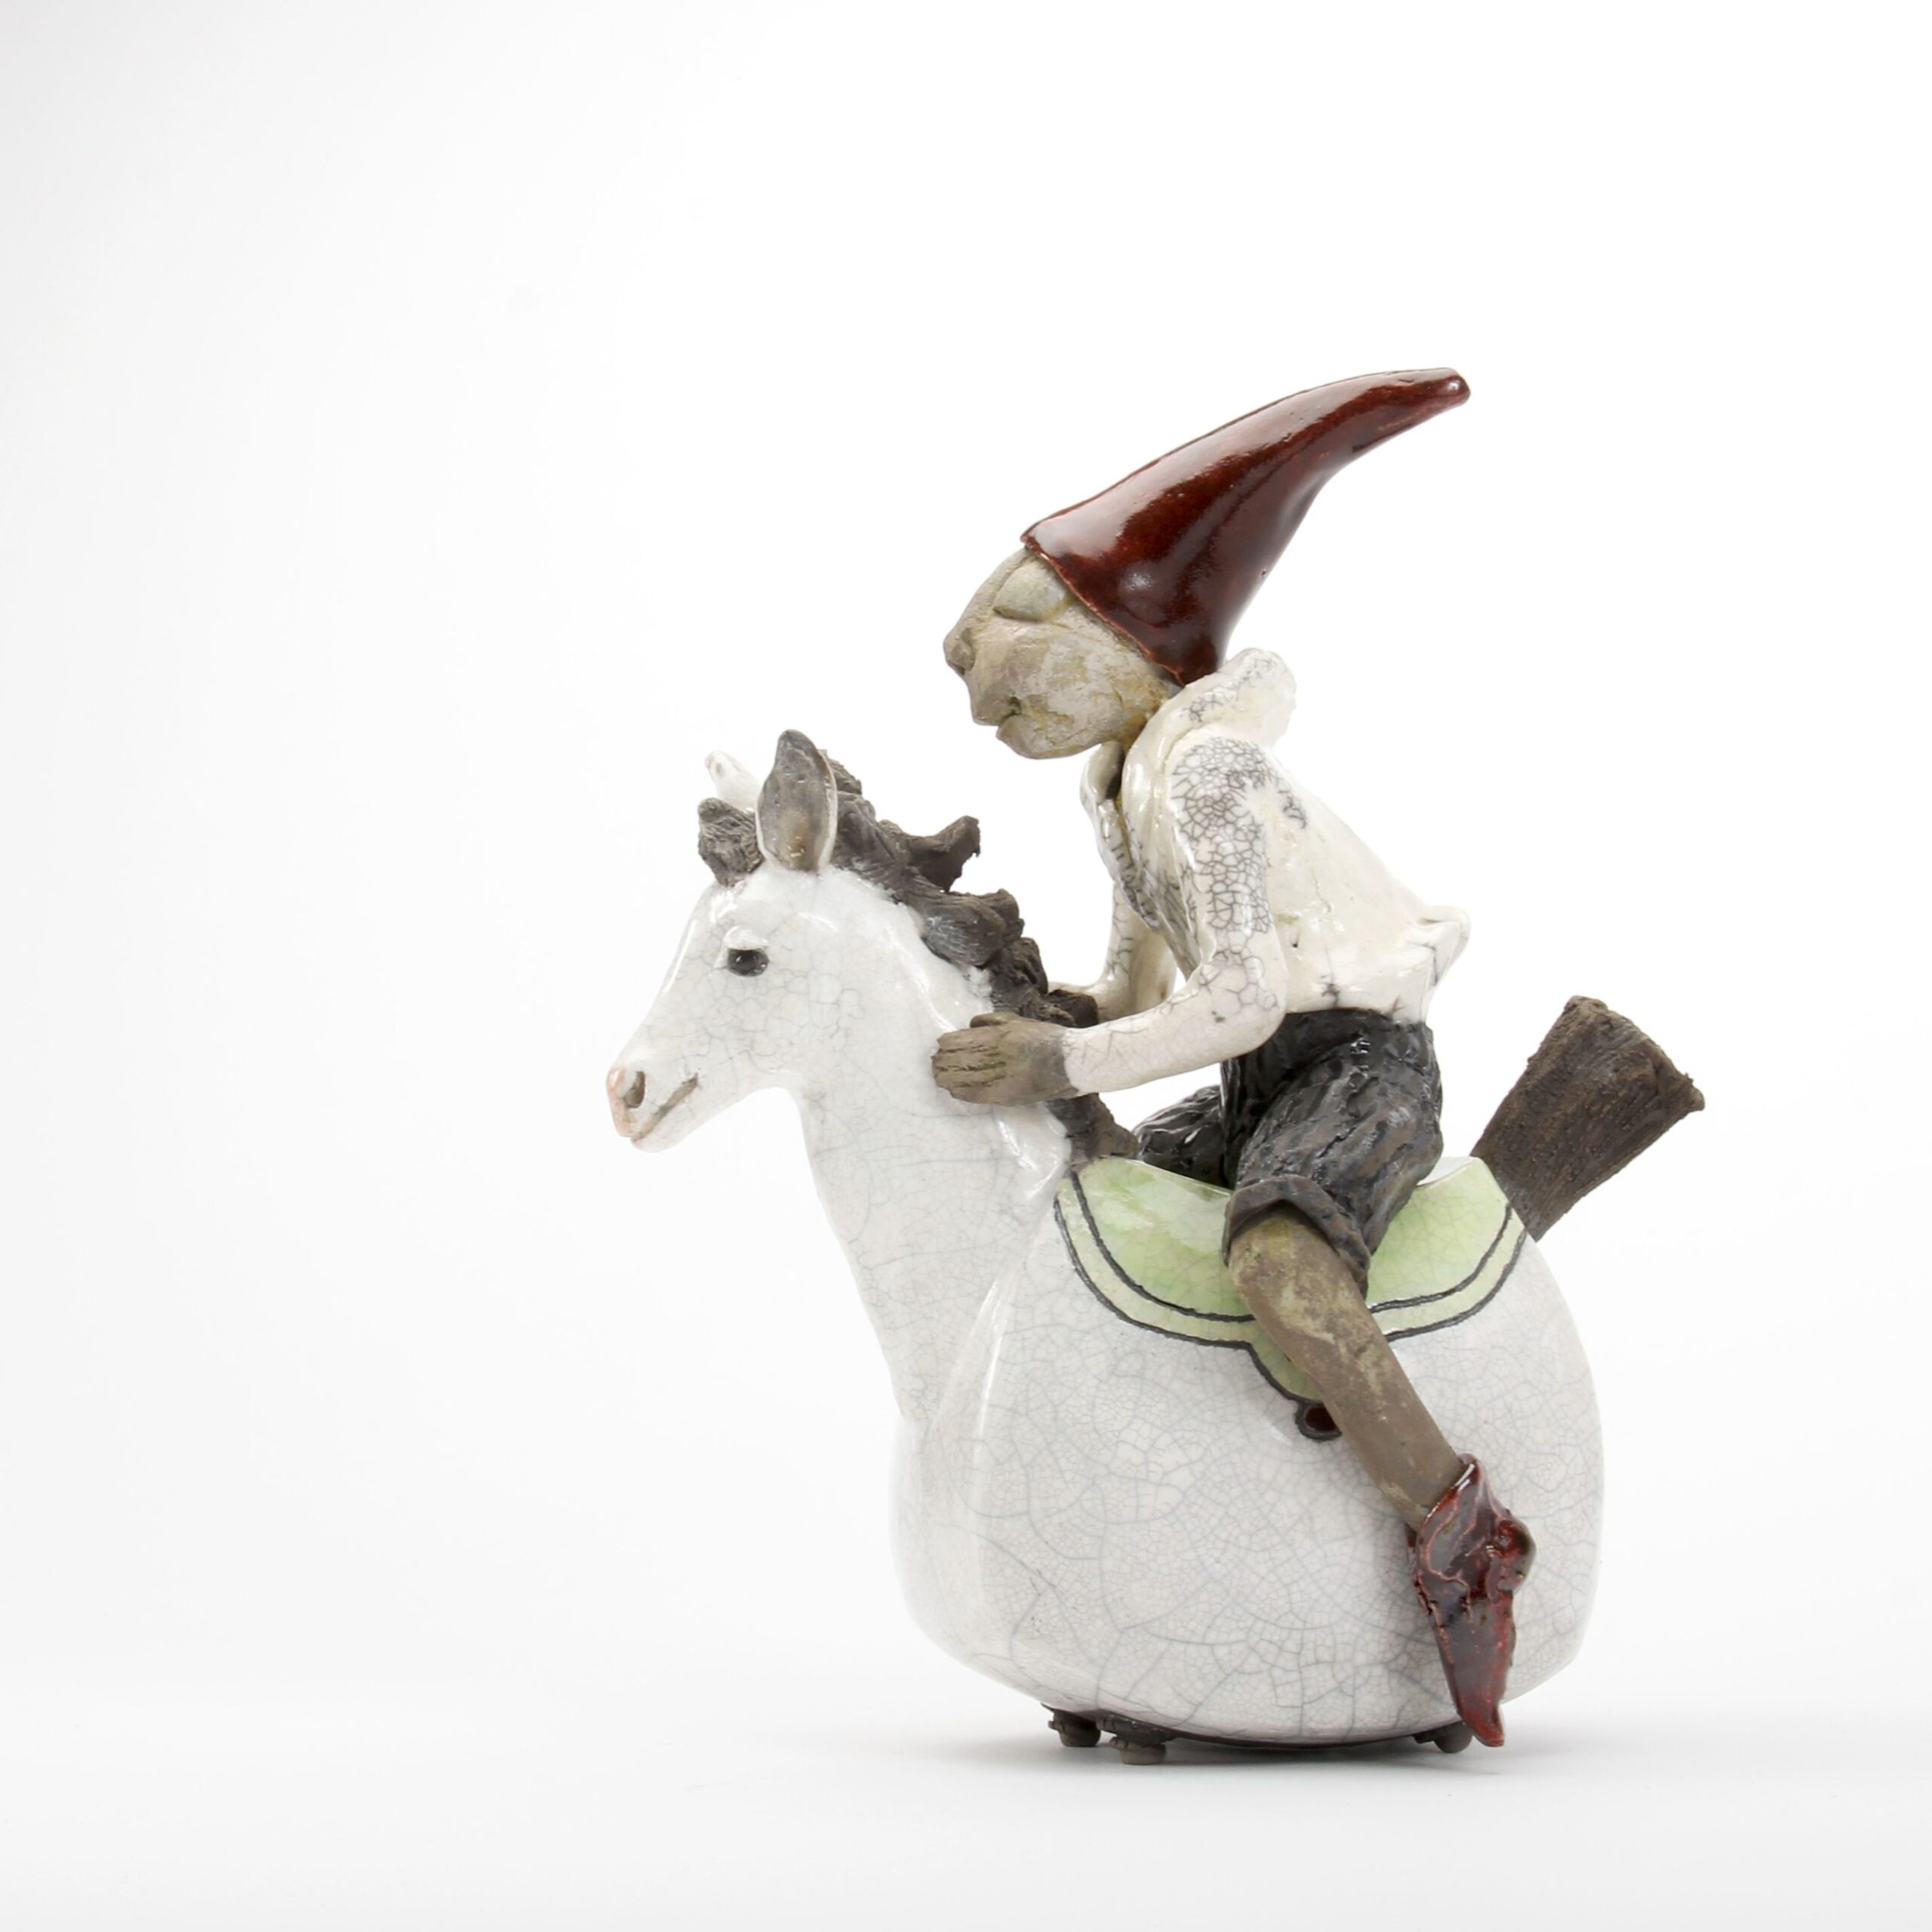 Zsuzsa Monostory: Rocking Horse with Figure Product Image 4 of 5